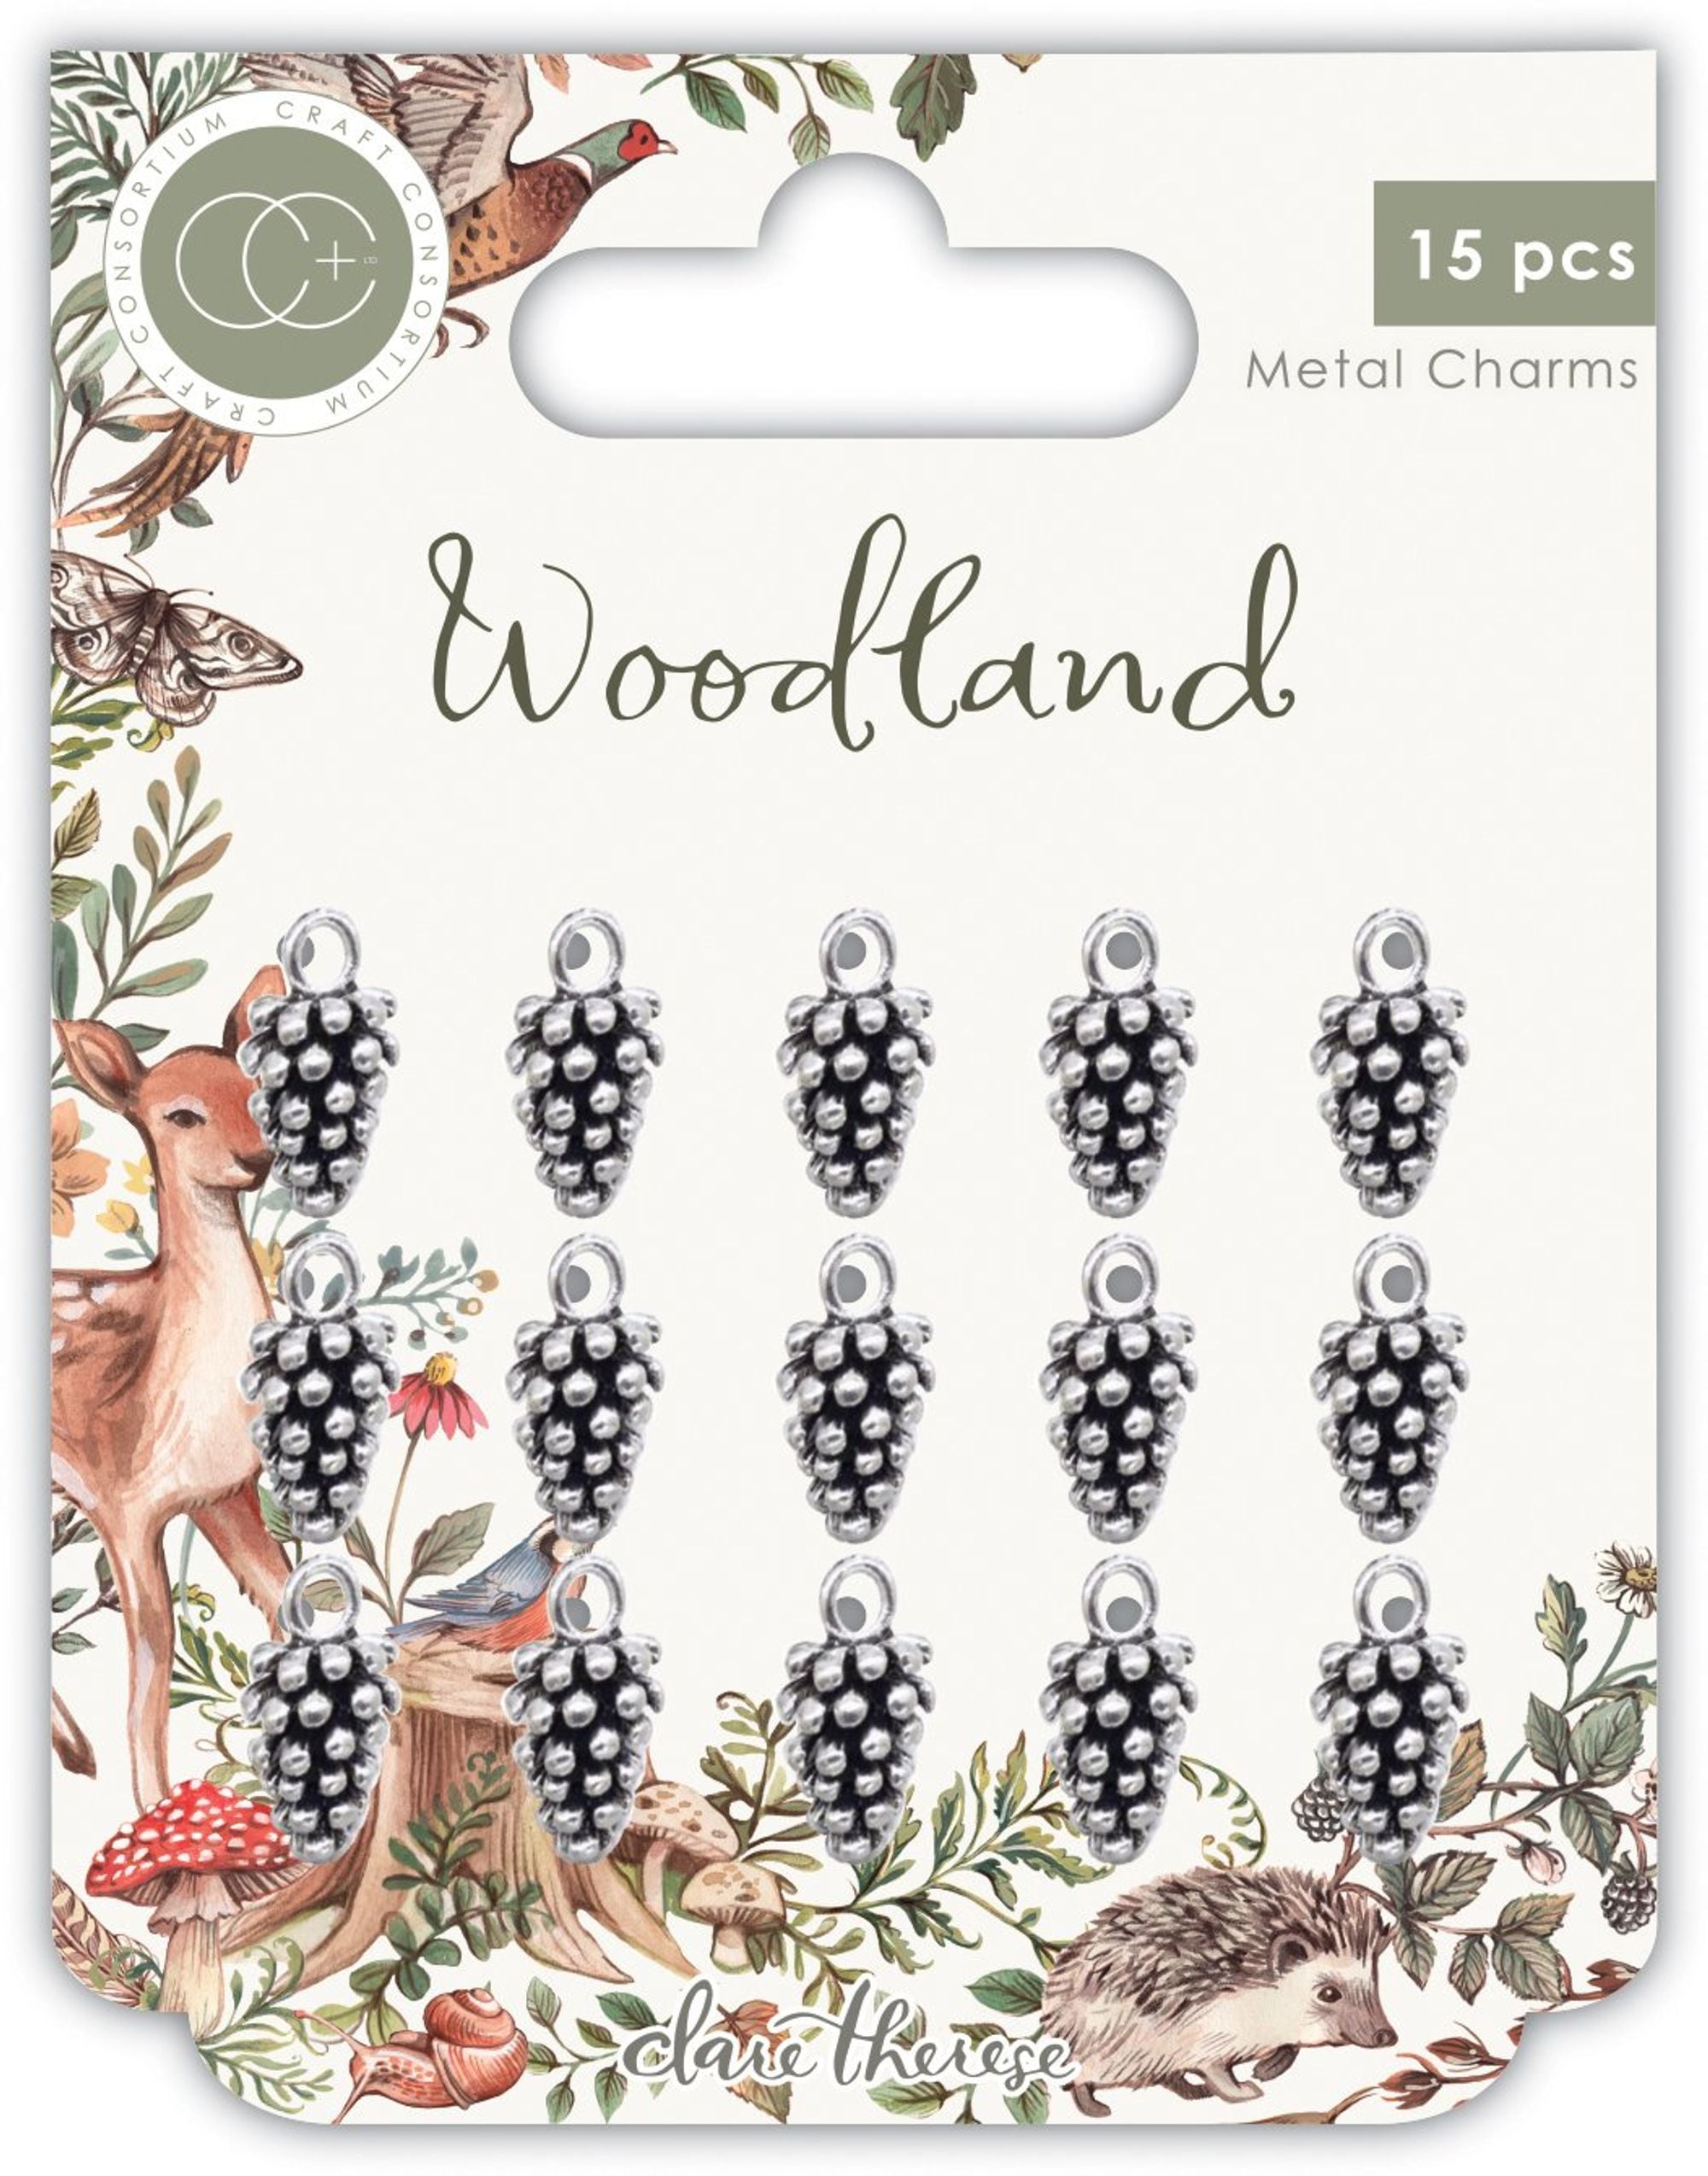 Woodland Silver Pine Comb Charms